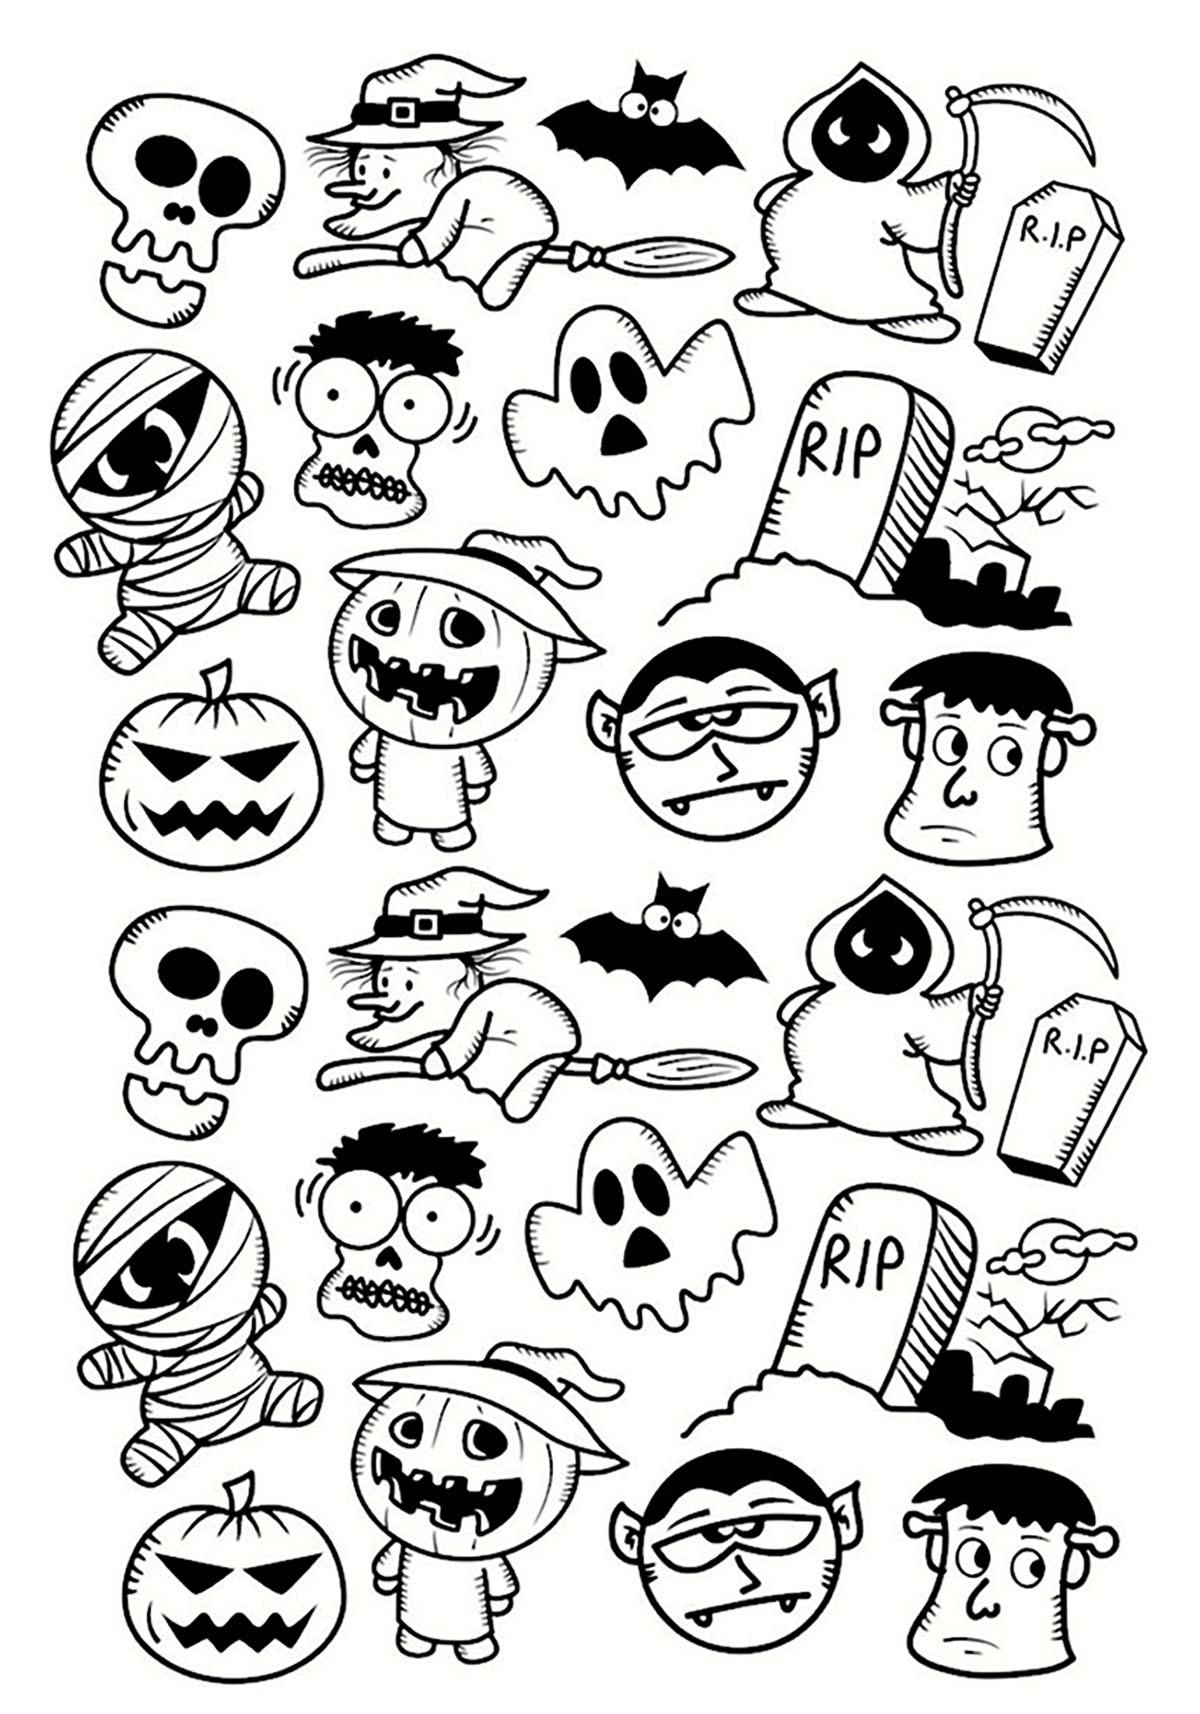 Dessin Hallowen Inspirant Photos Halloween Doodle Characters Halloween Adult Coloring Pages